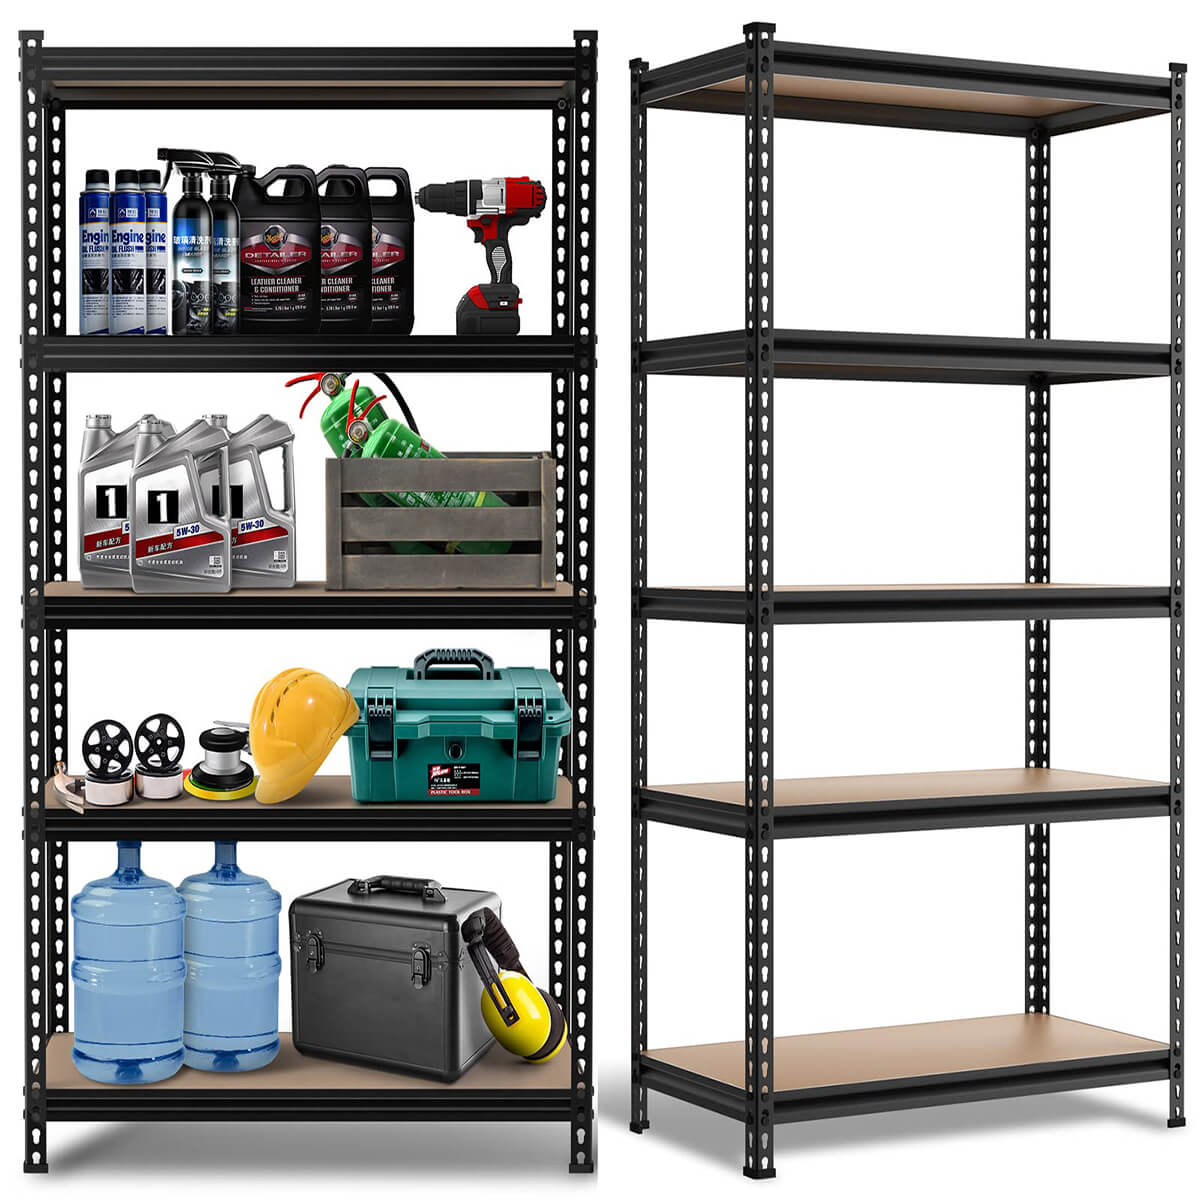 Elecwish 5-Tier Storage Shelves Adjustable TH715 displays with items and without items on it